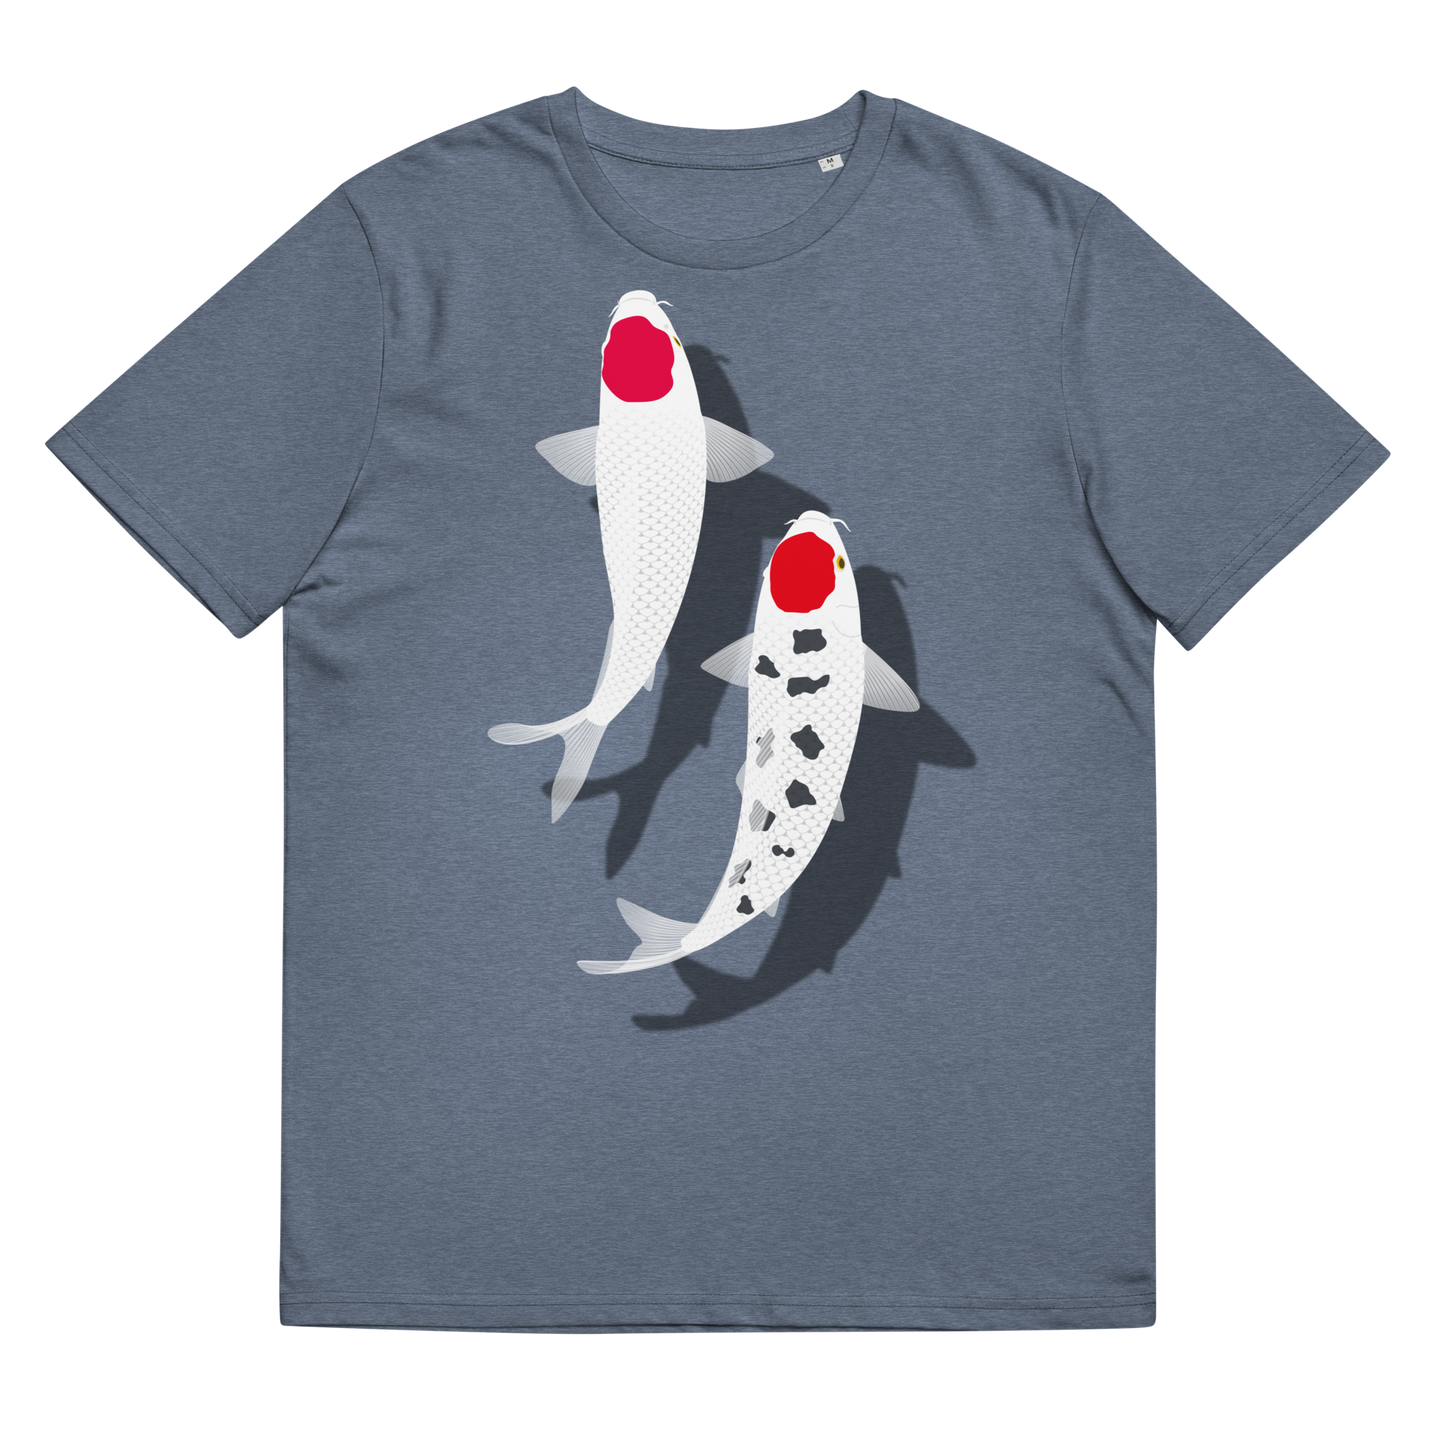 [Koi] T-shirt tancho red and white (unisex)